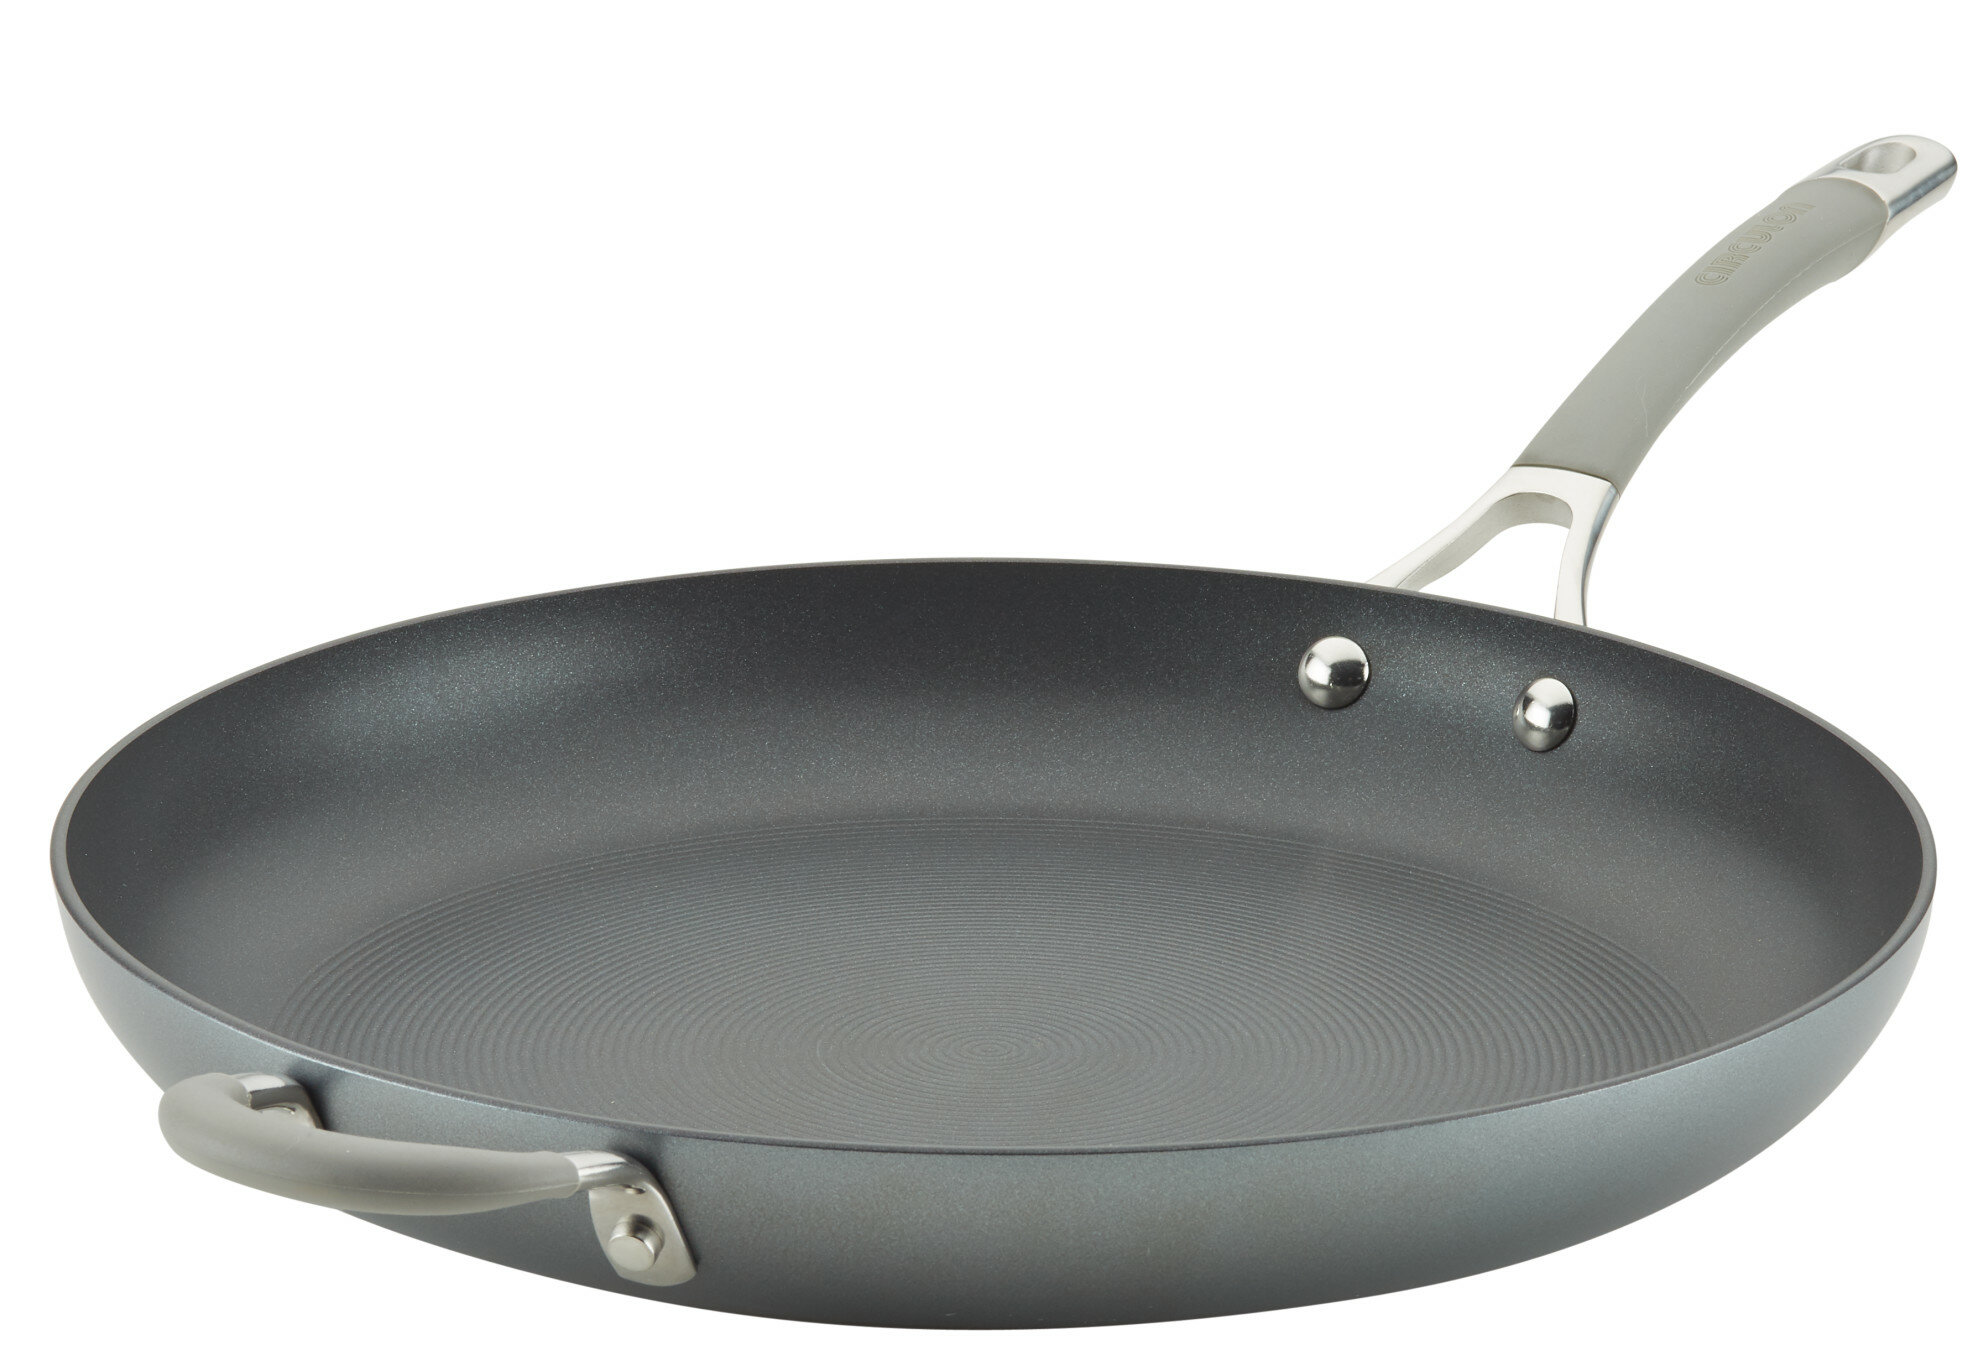 Details about   Advanced Hard Anodized Nonstick Frying Pan/ Fry Pan/Hard Anodized Skillet 8.5" 